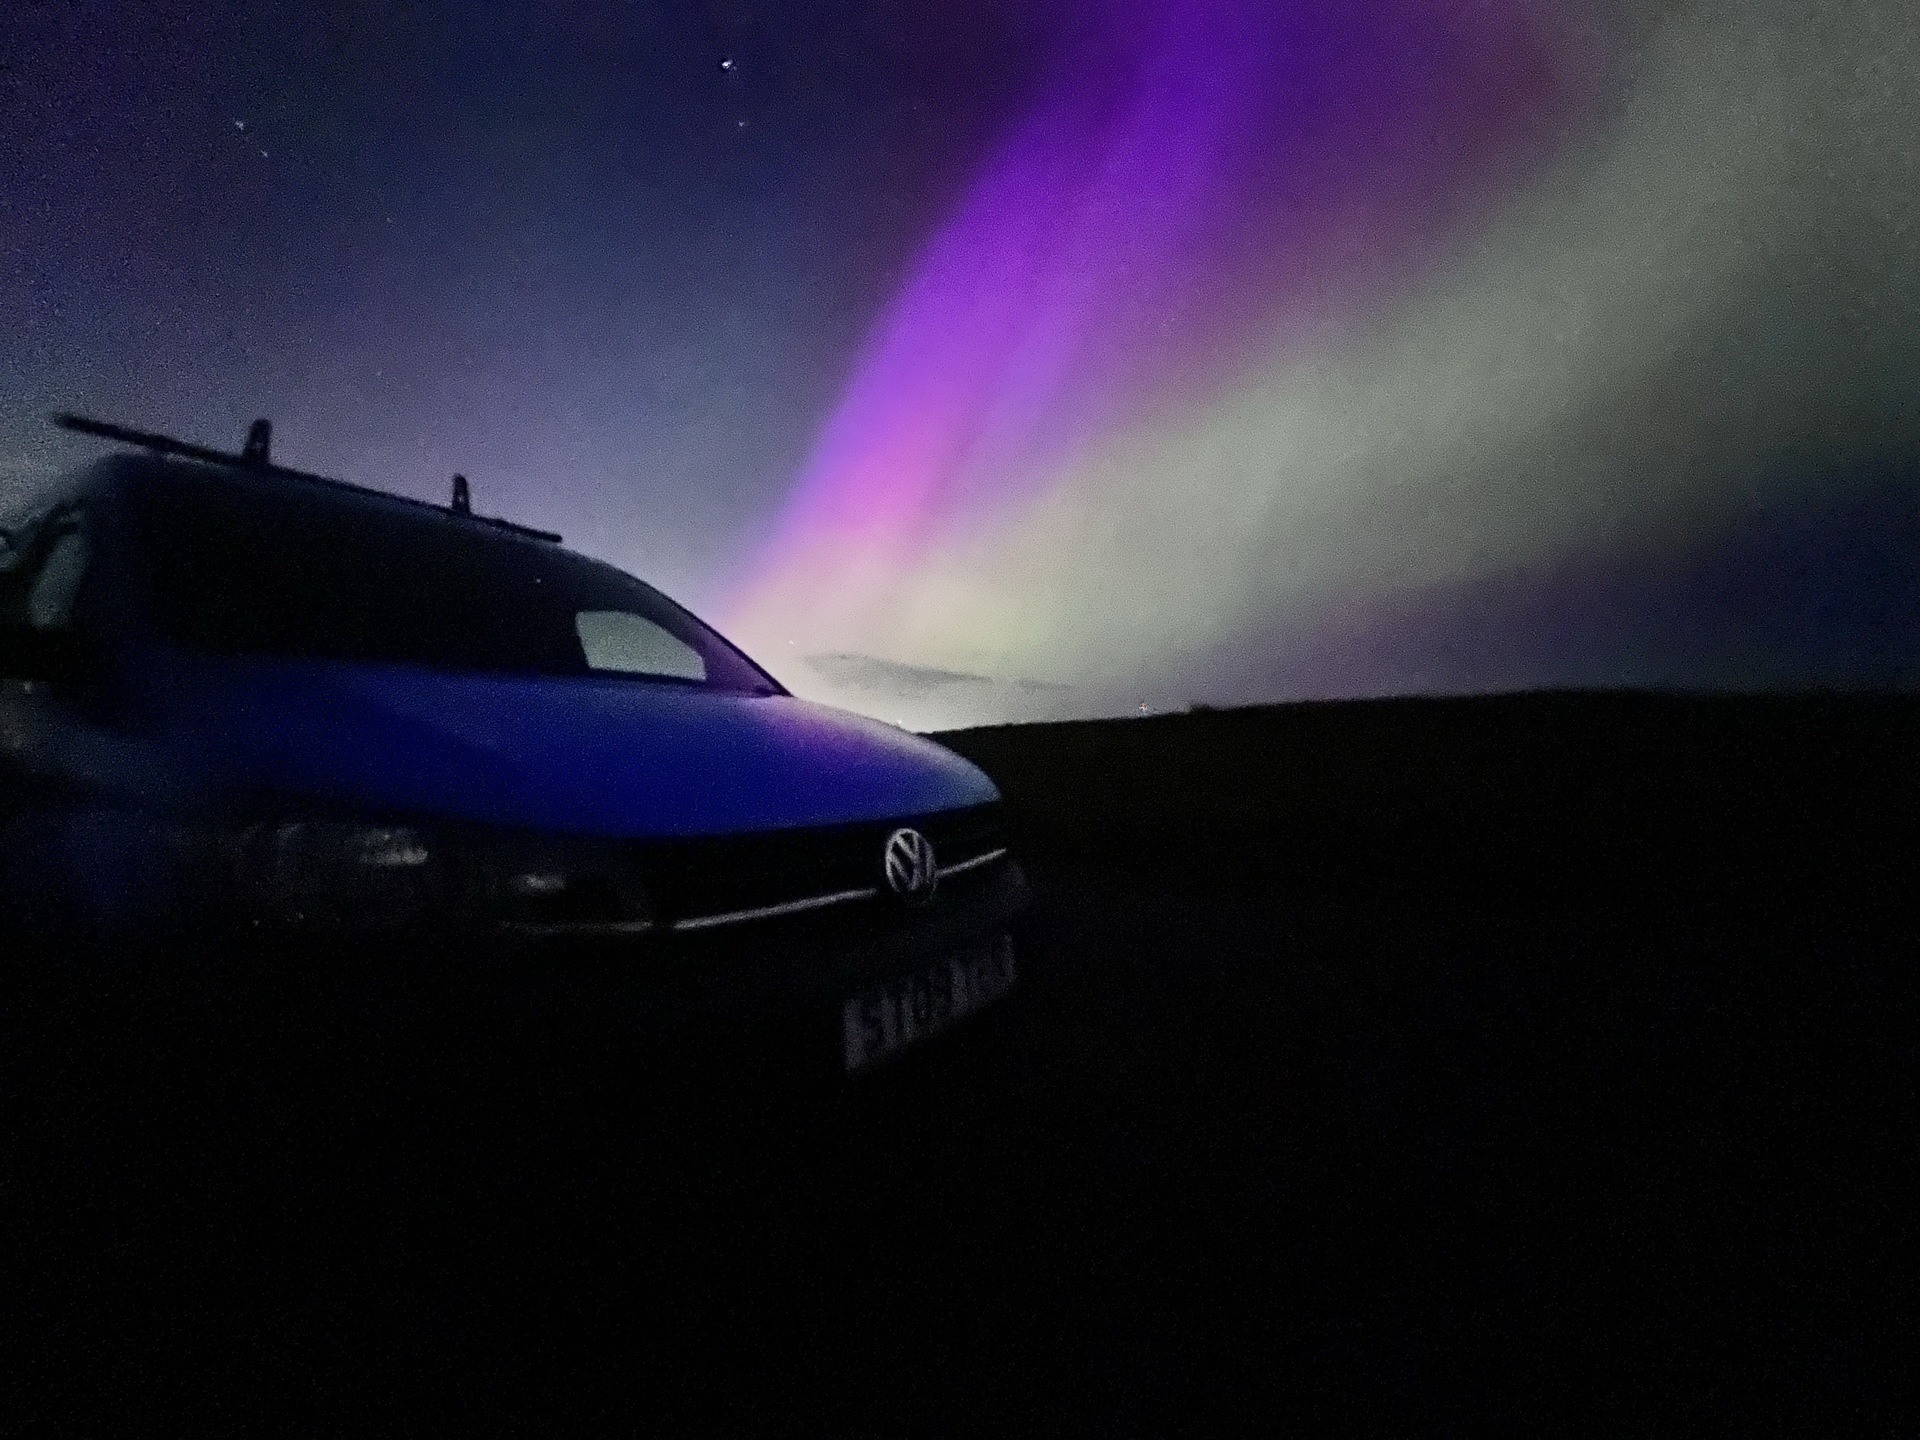 Blue and purple waves of light were seen by STV viewers.